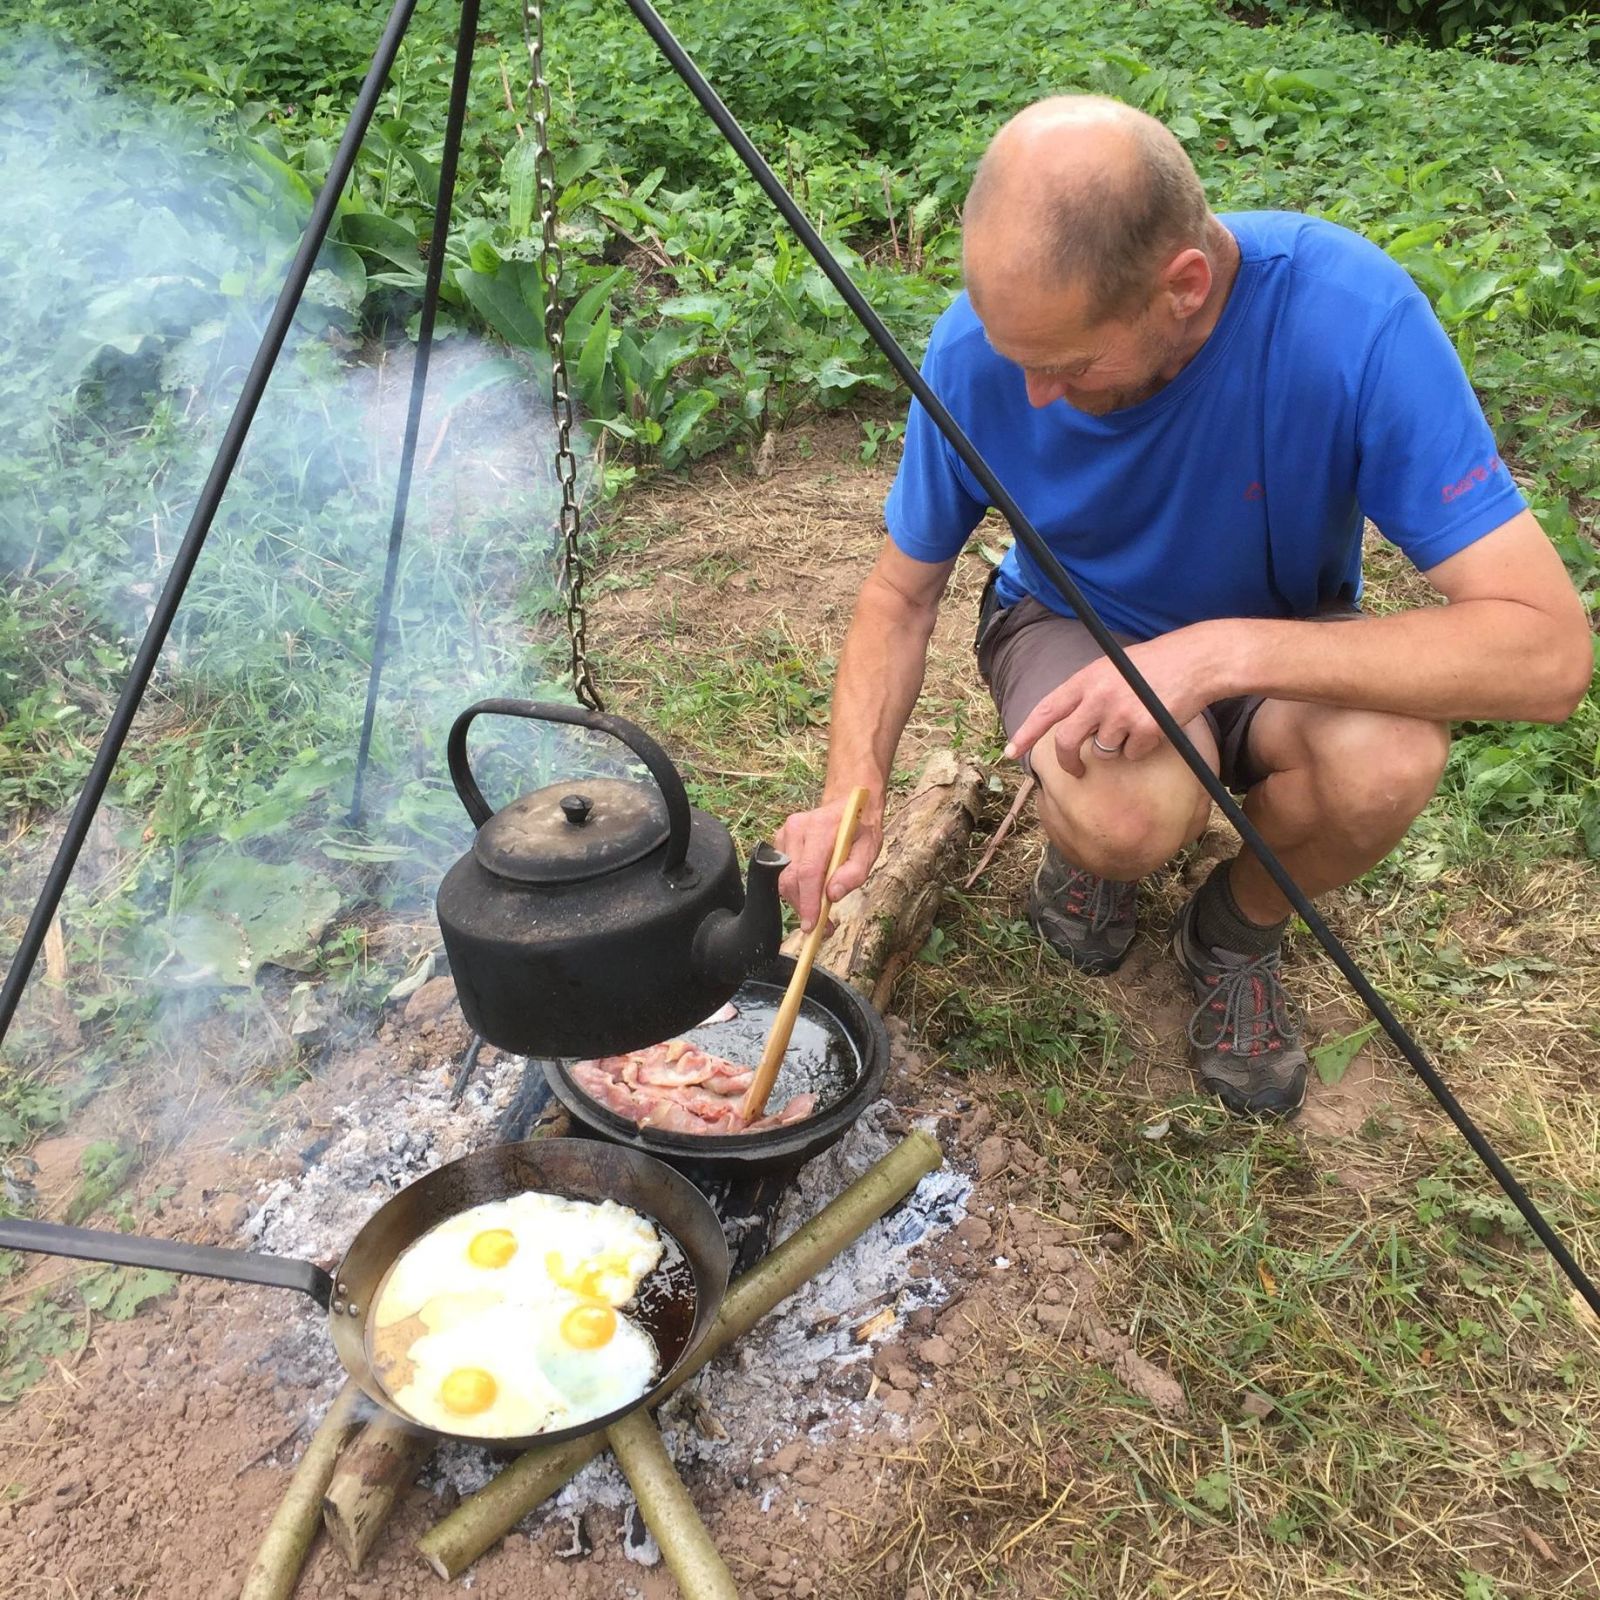 Cooking breakfast on canoe expedition